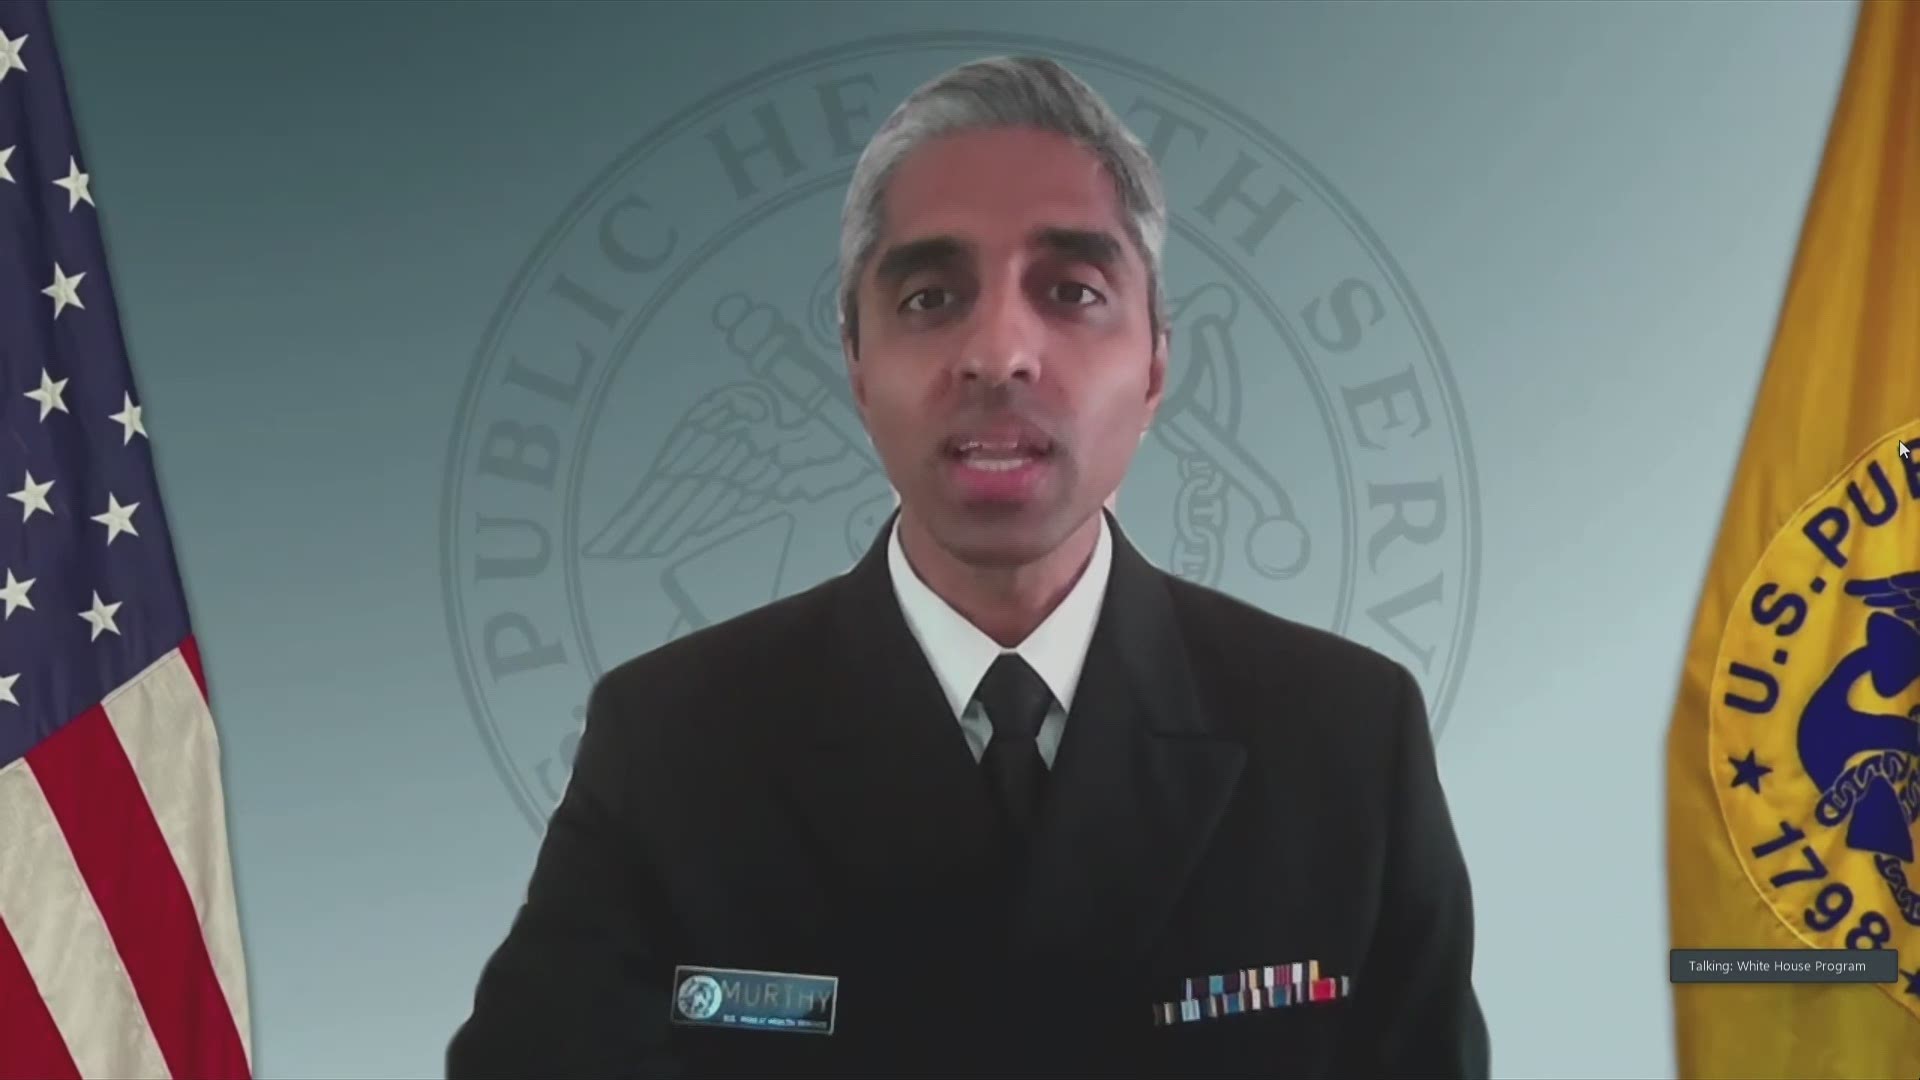 Dr. Vivek Murthy, Surgeon General of the United States, updates the public on the plan to educate Americans on the coronavirus and vaccines.